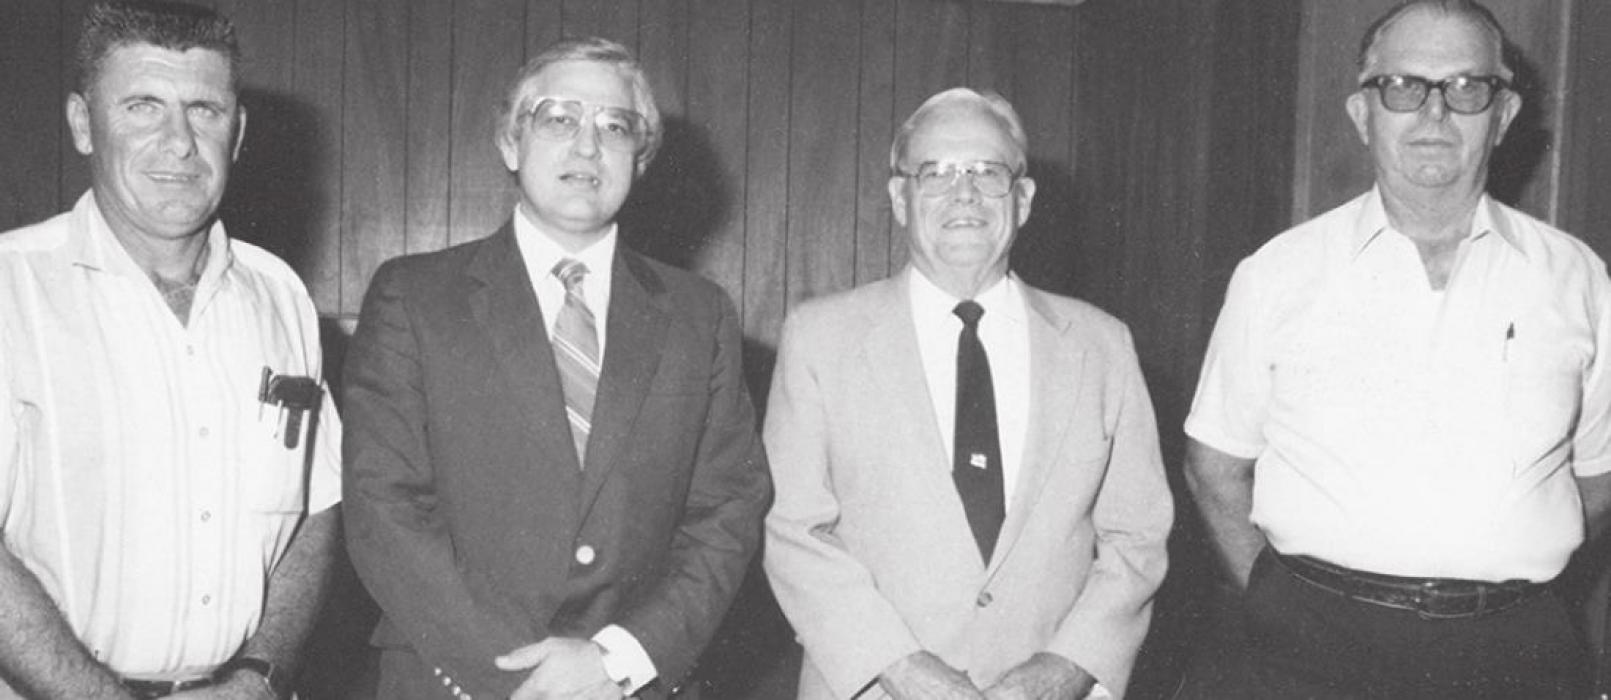 1986, VFW Post 5254 and the Fayette Fair Association hosted Fayette County and La Grange officials at an appreciation event. (Left to right): Fair President Leo Wick, Fayette County Judge Dan R. Beck, La Grange Mayor Charlie Jungmichel and VFW Post 5254 Commander Harvey Mueller. Photo courtesy of the Fayette Heritage Museum and Archives.